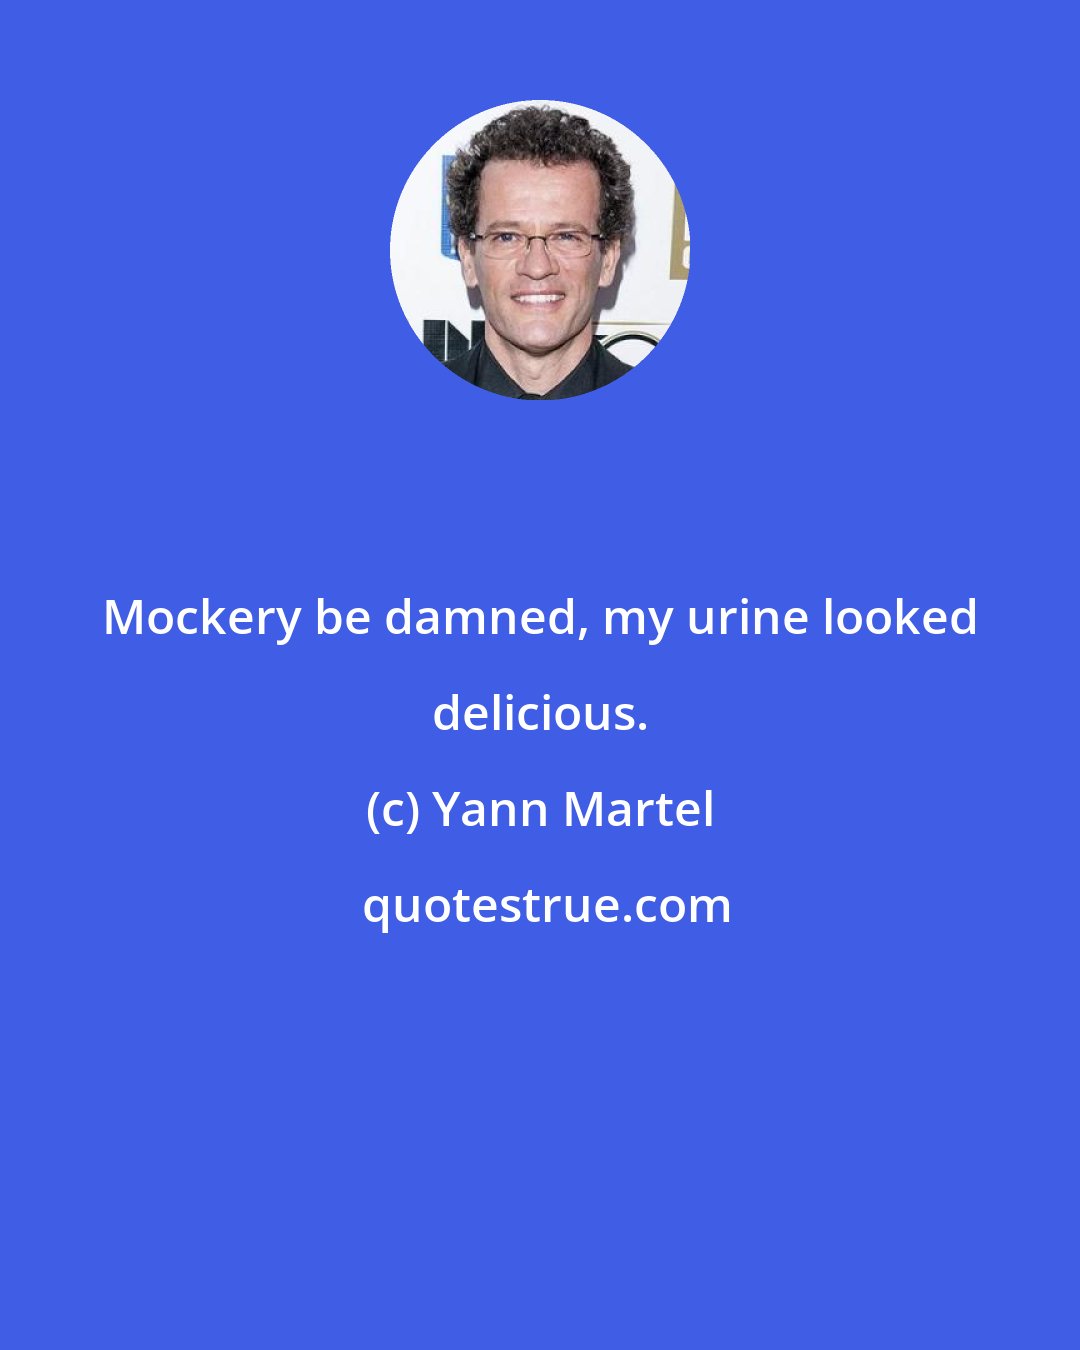 Yann Martel: Mockery be damned, my urine looked delicious.